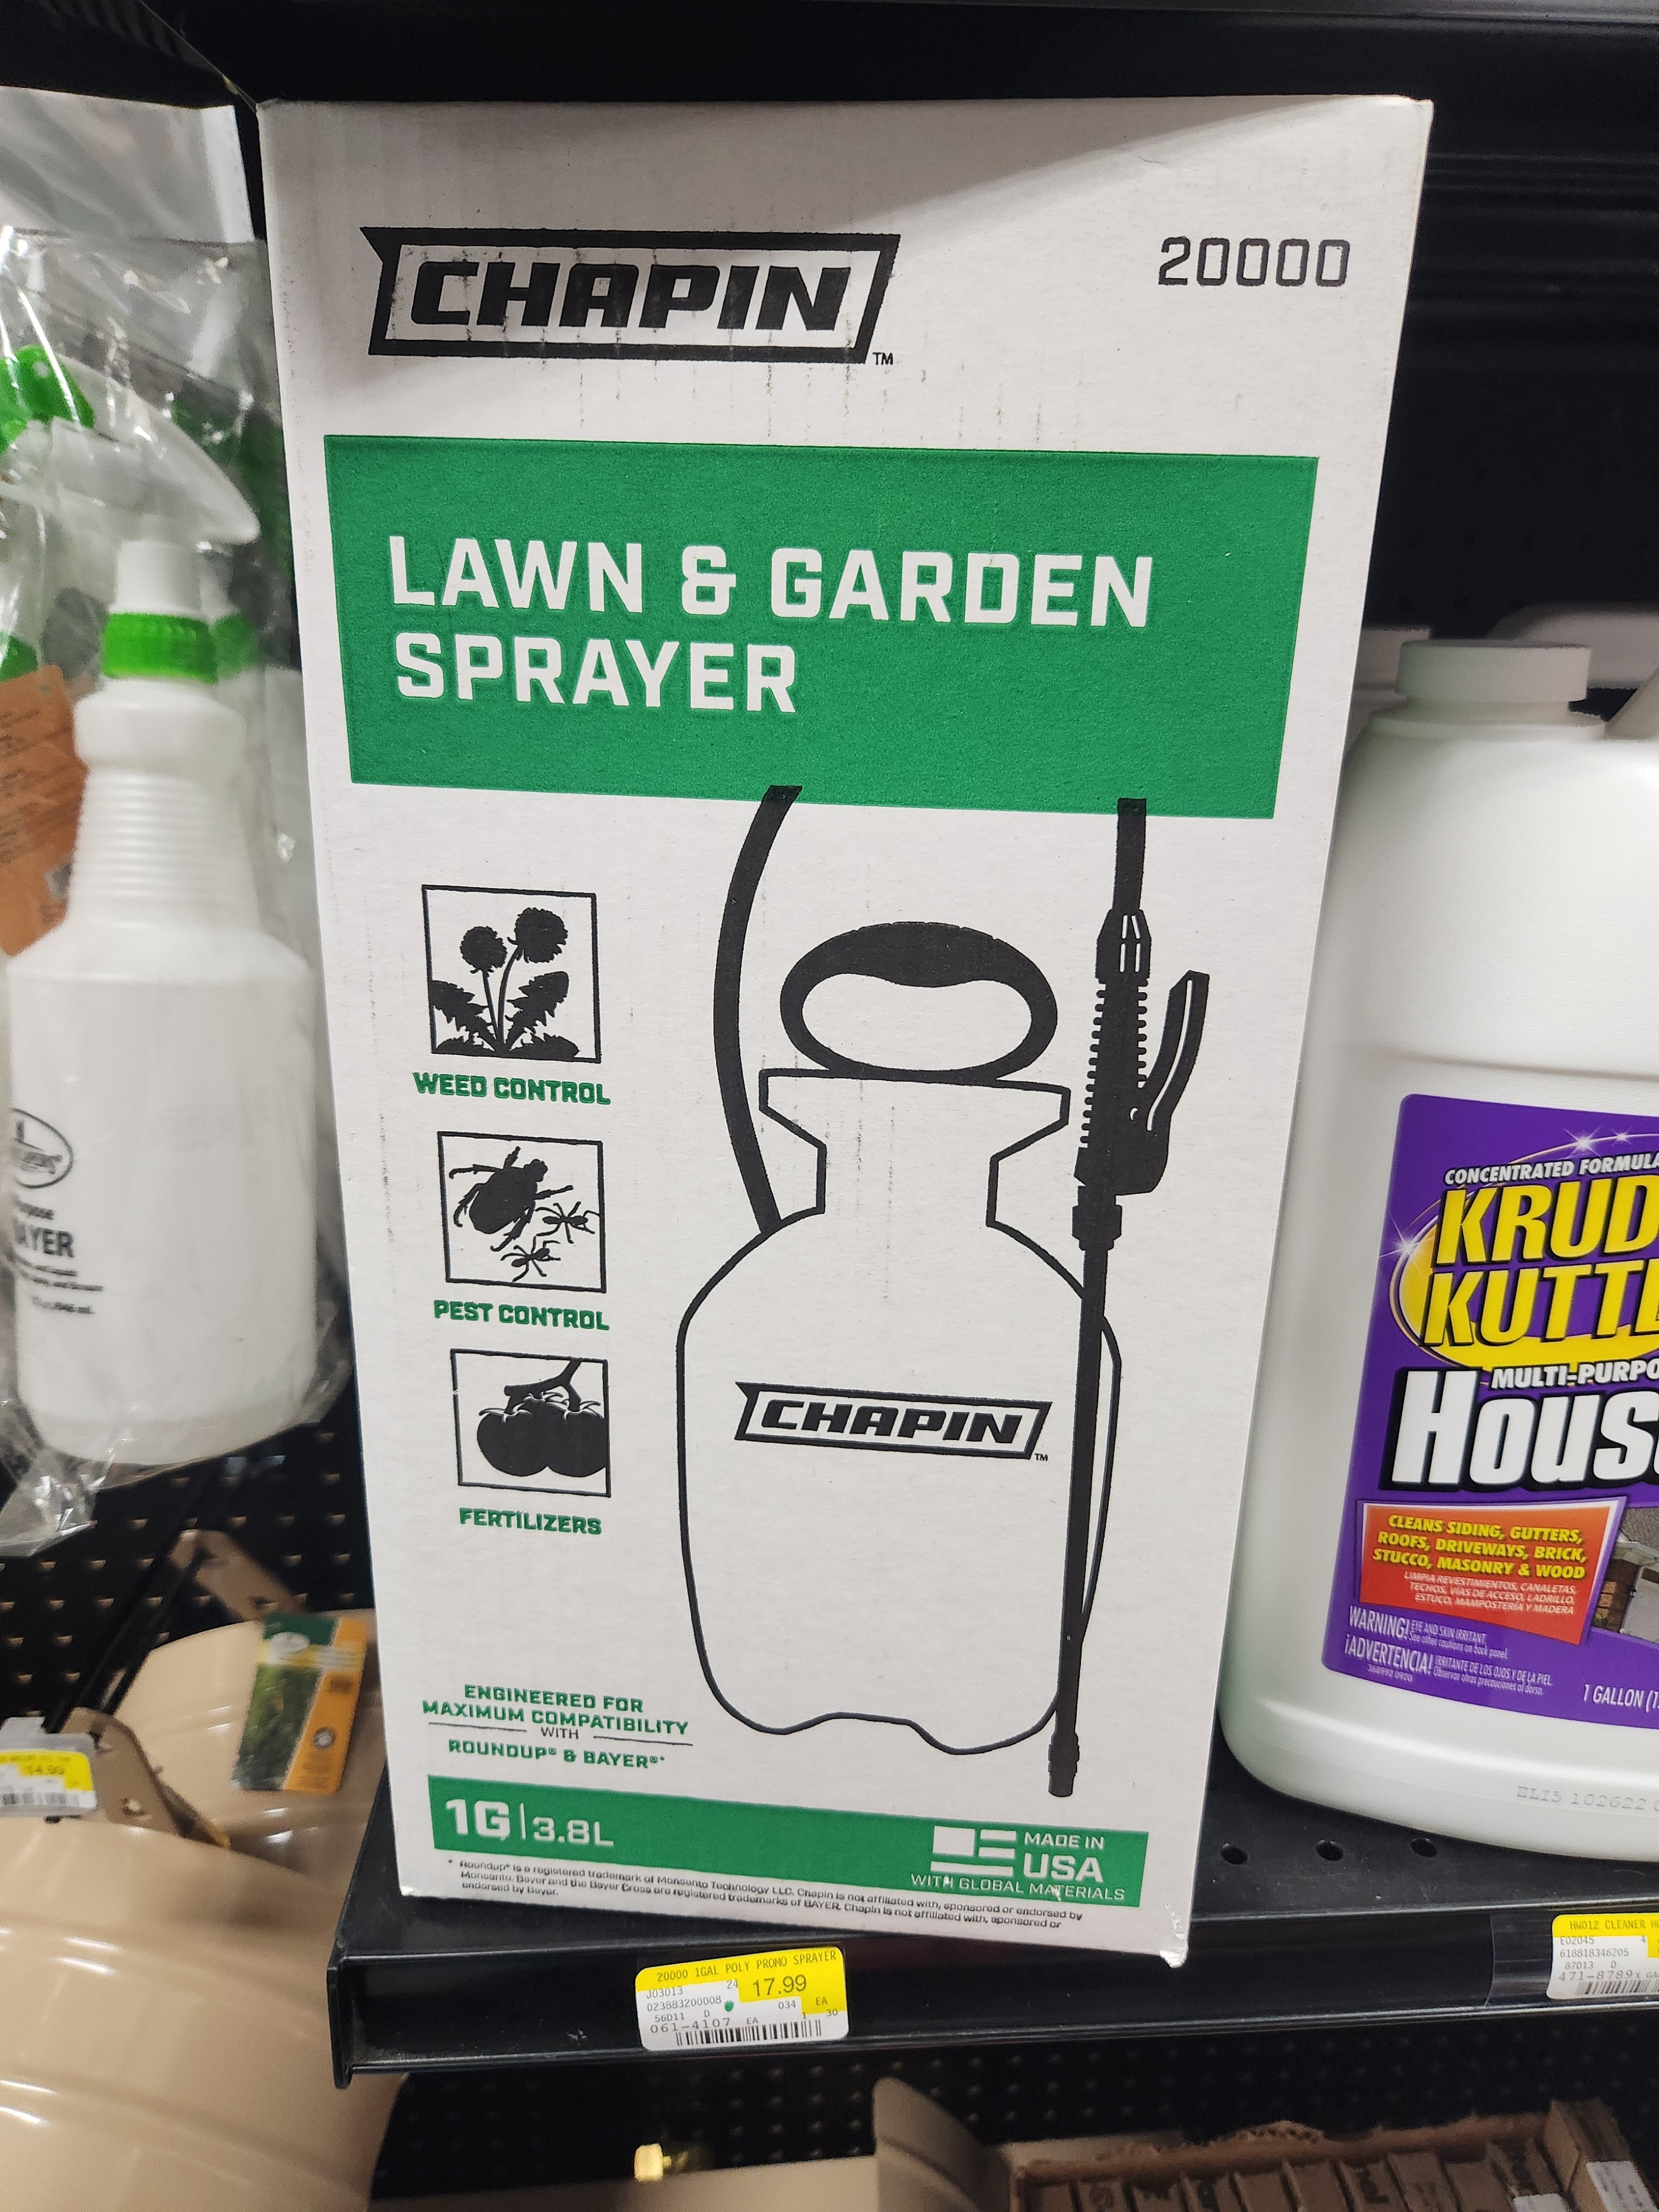 Chapin 20000 Made in USA 1 -Gallon Lawn and Garden Pump Pressured Sprayer, for Spraying Plants, Garden Watering, Weeds and Pests, Polypropylene, Translucent White